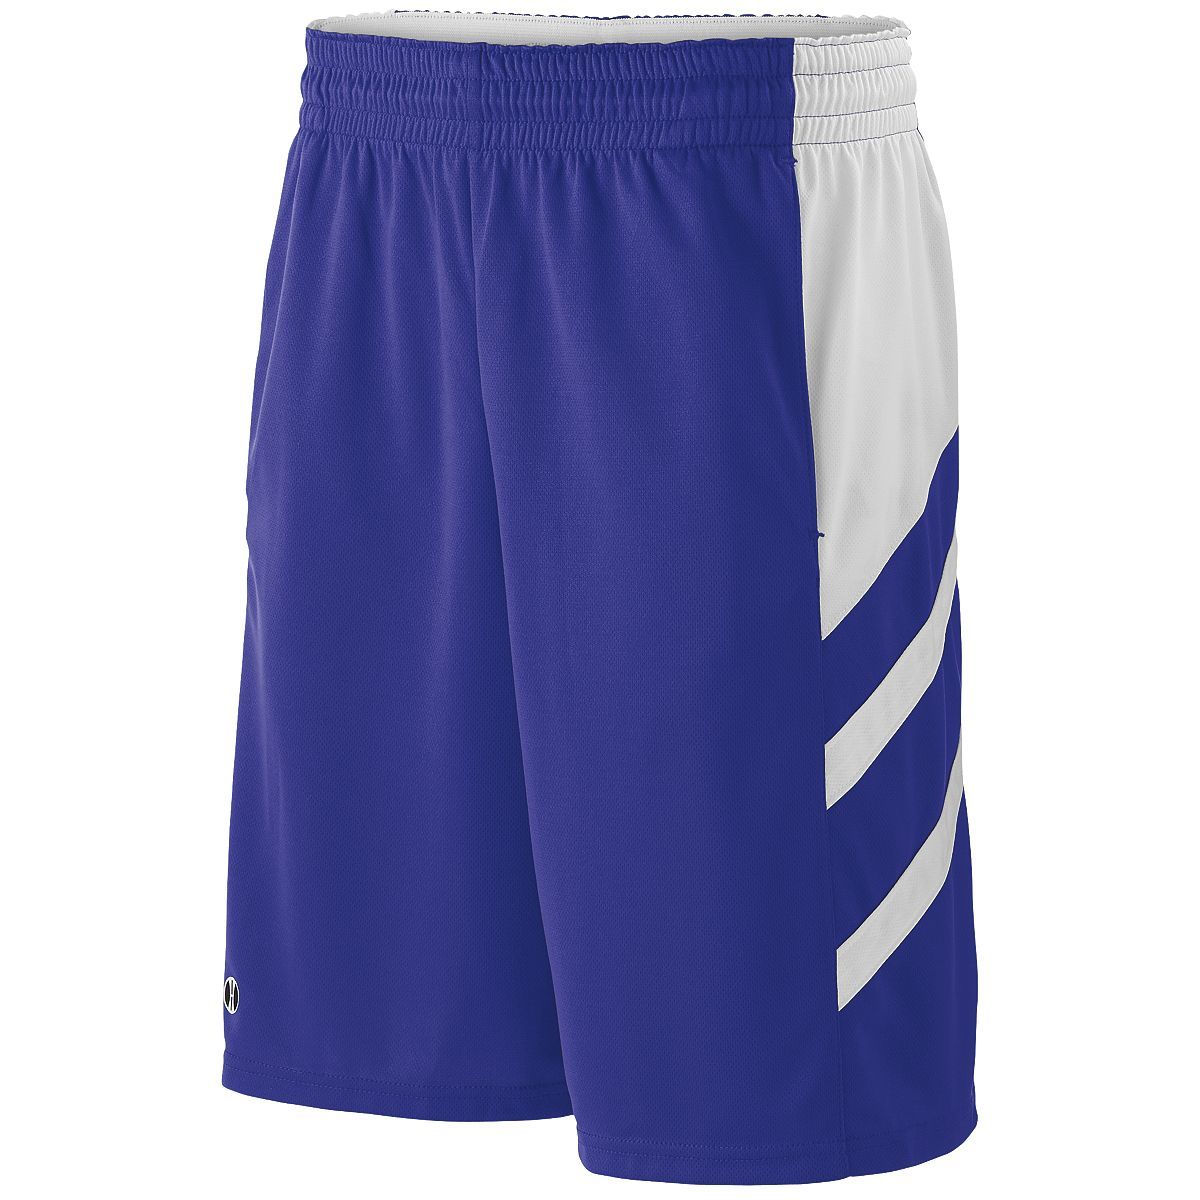 Holloway Helium Shorts in Purple/White  -Part of the Adult, Adult-Shorts, Holloway product lines at KanaleyCreations.com